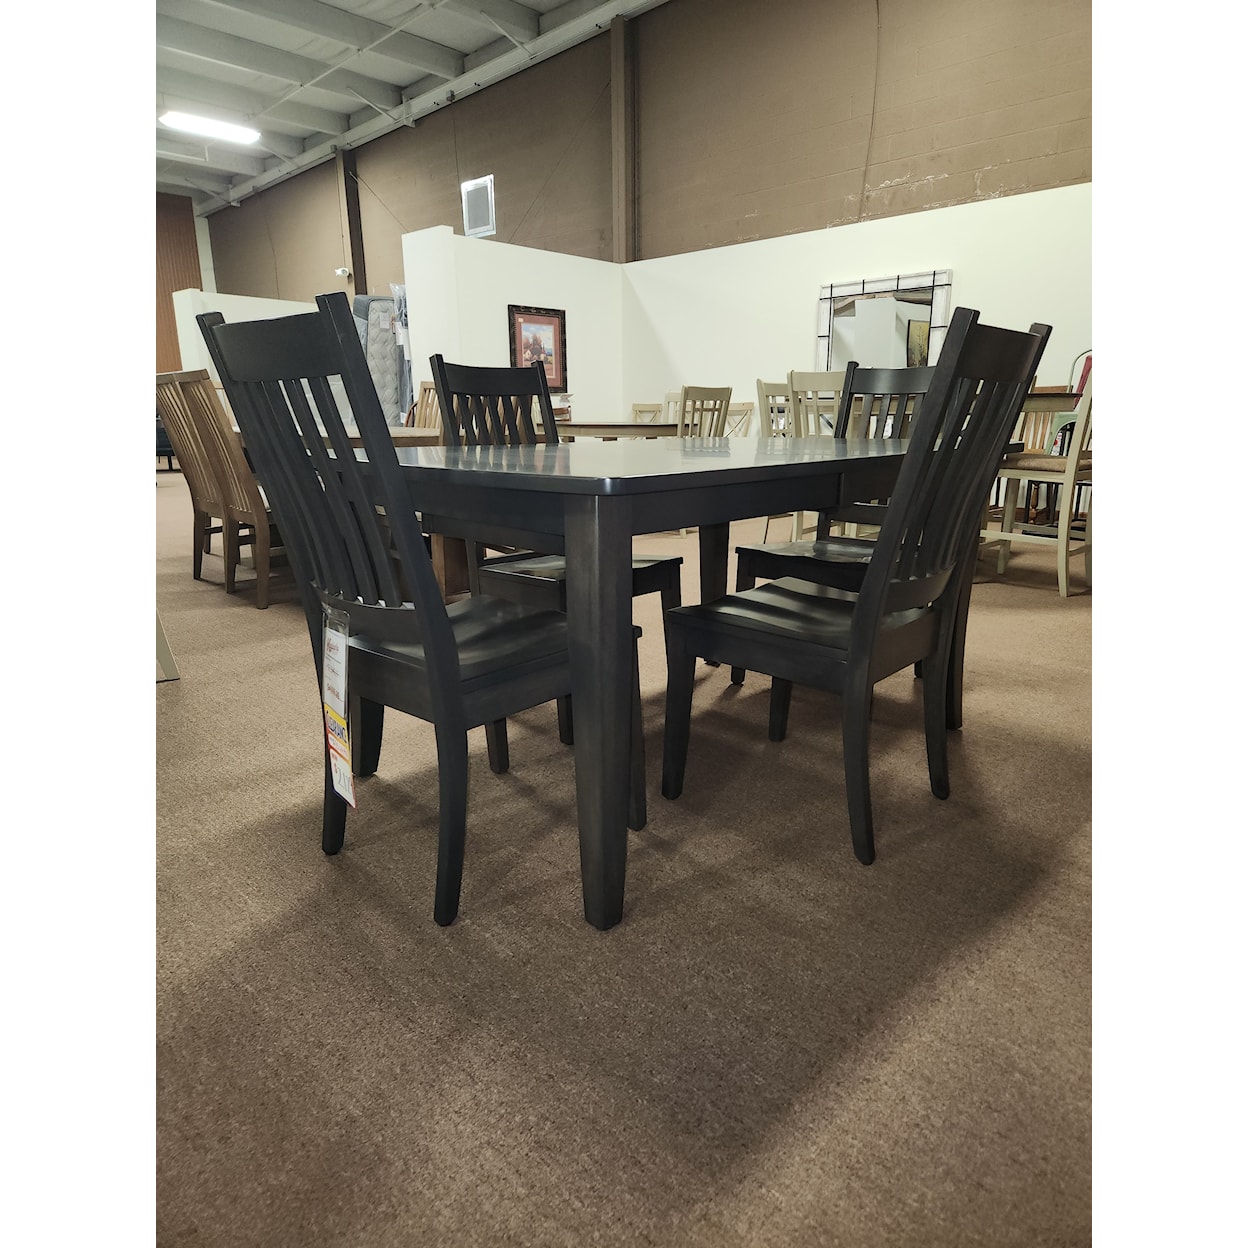 Country View Woodworking Elite Dining Table and 4  chairs